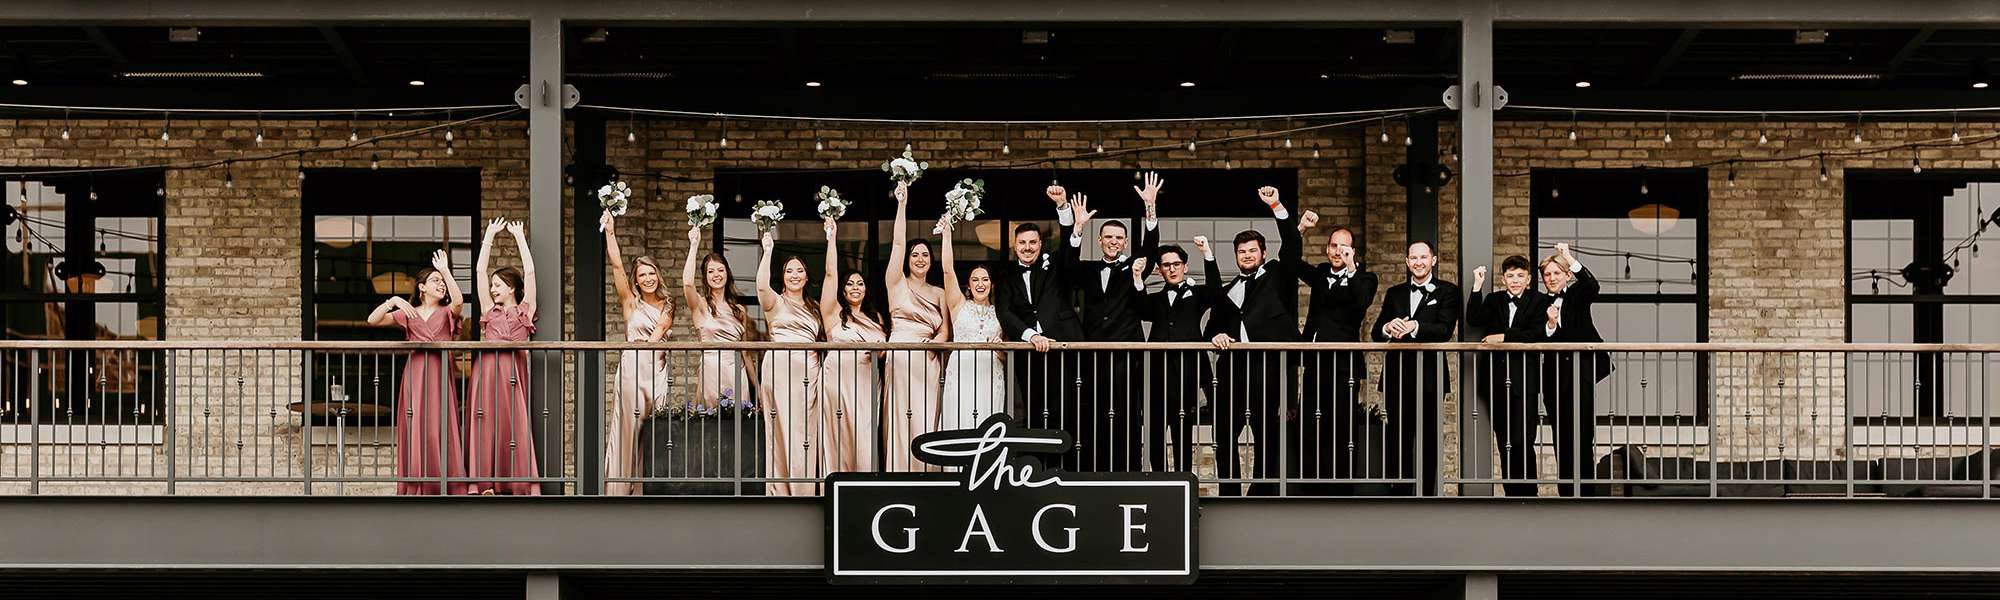 Kayla and Patrick's wedding at The Gage